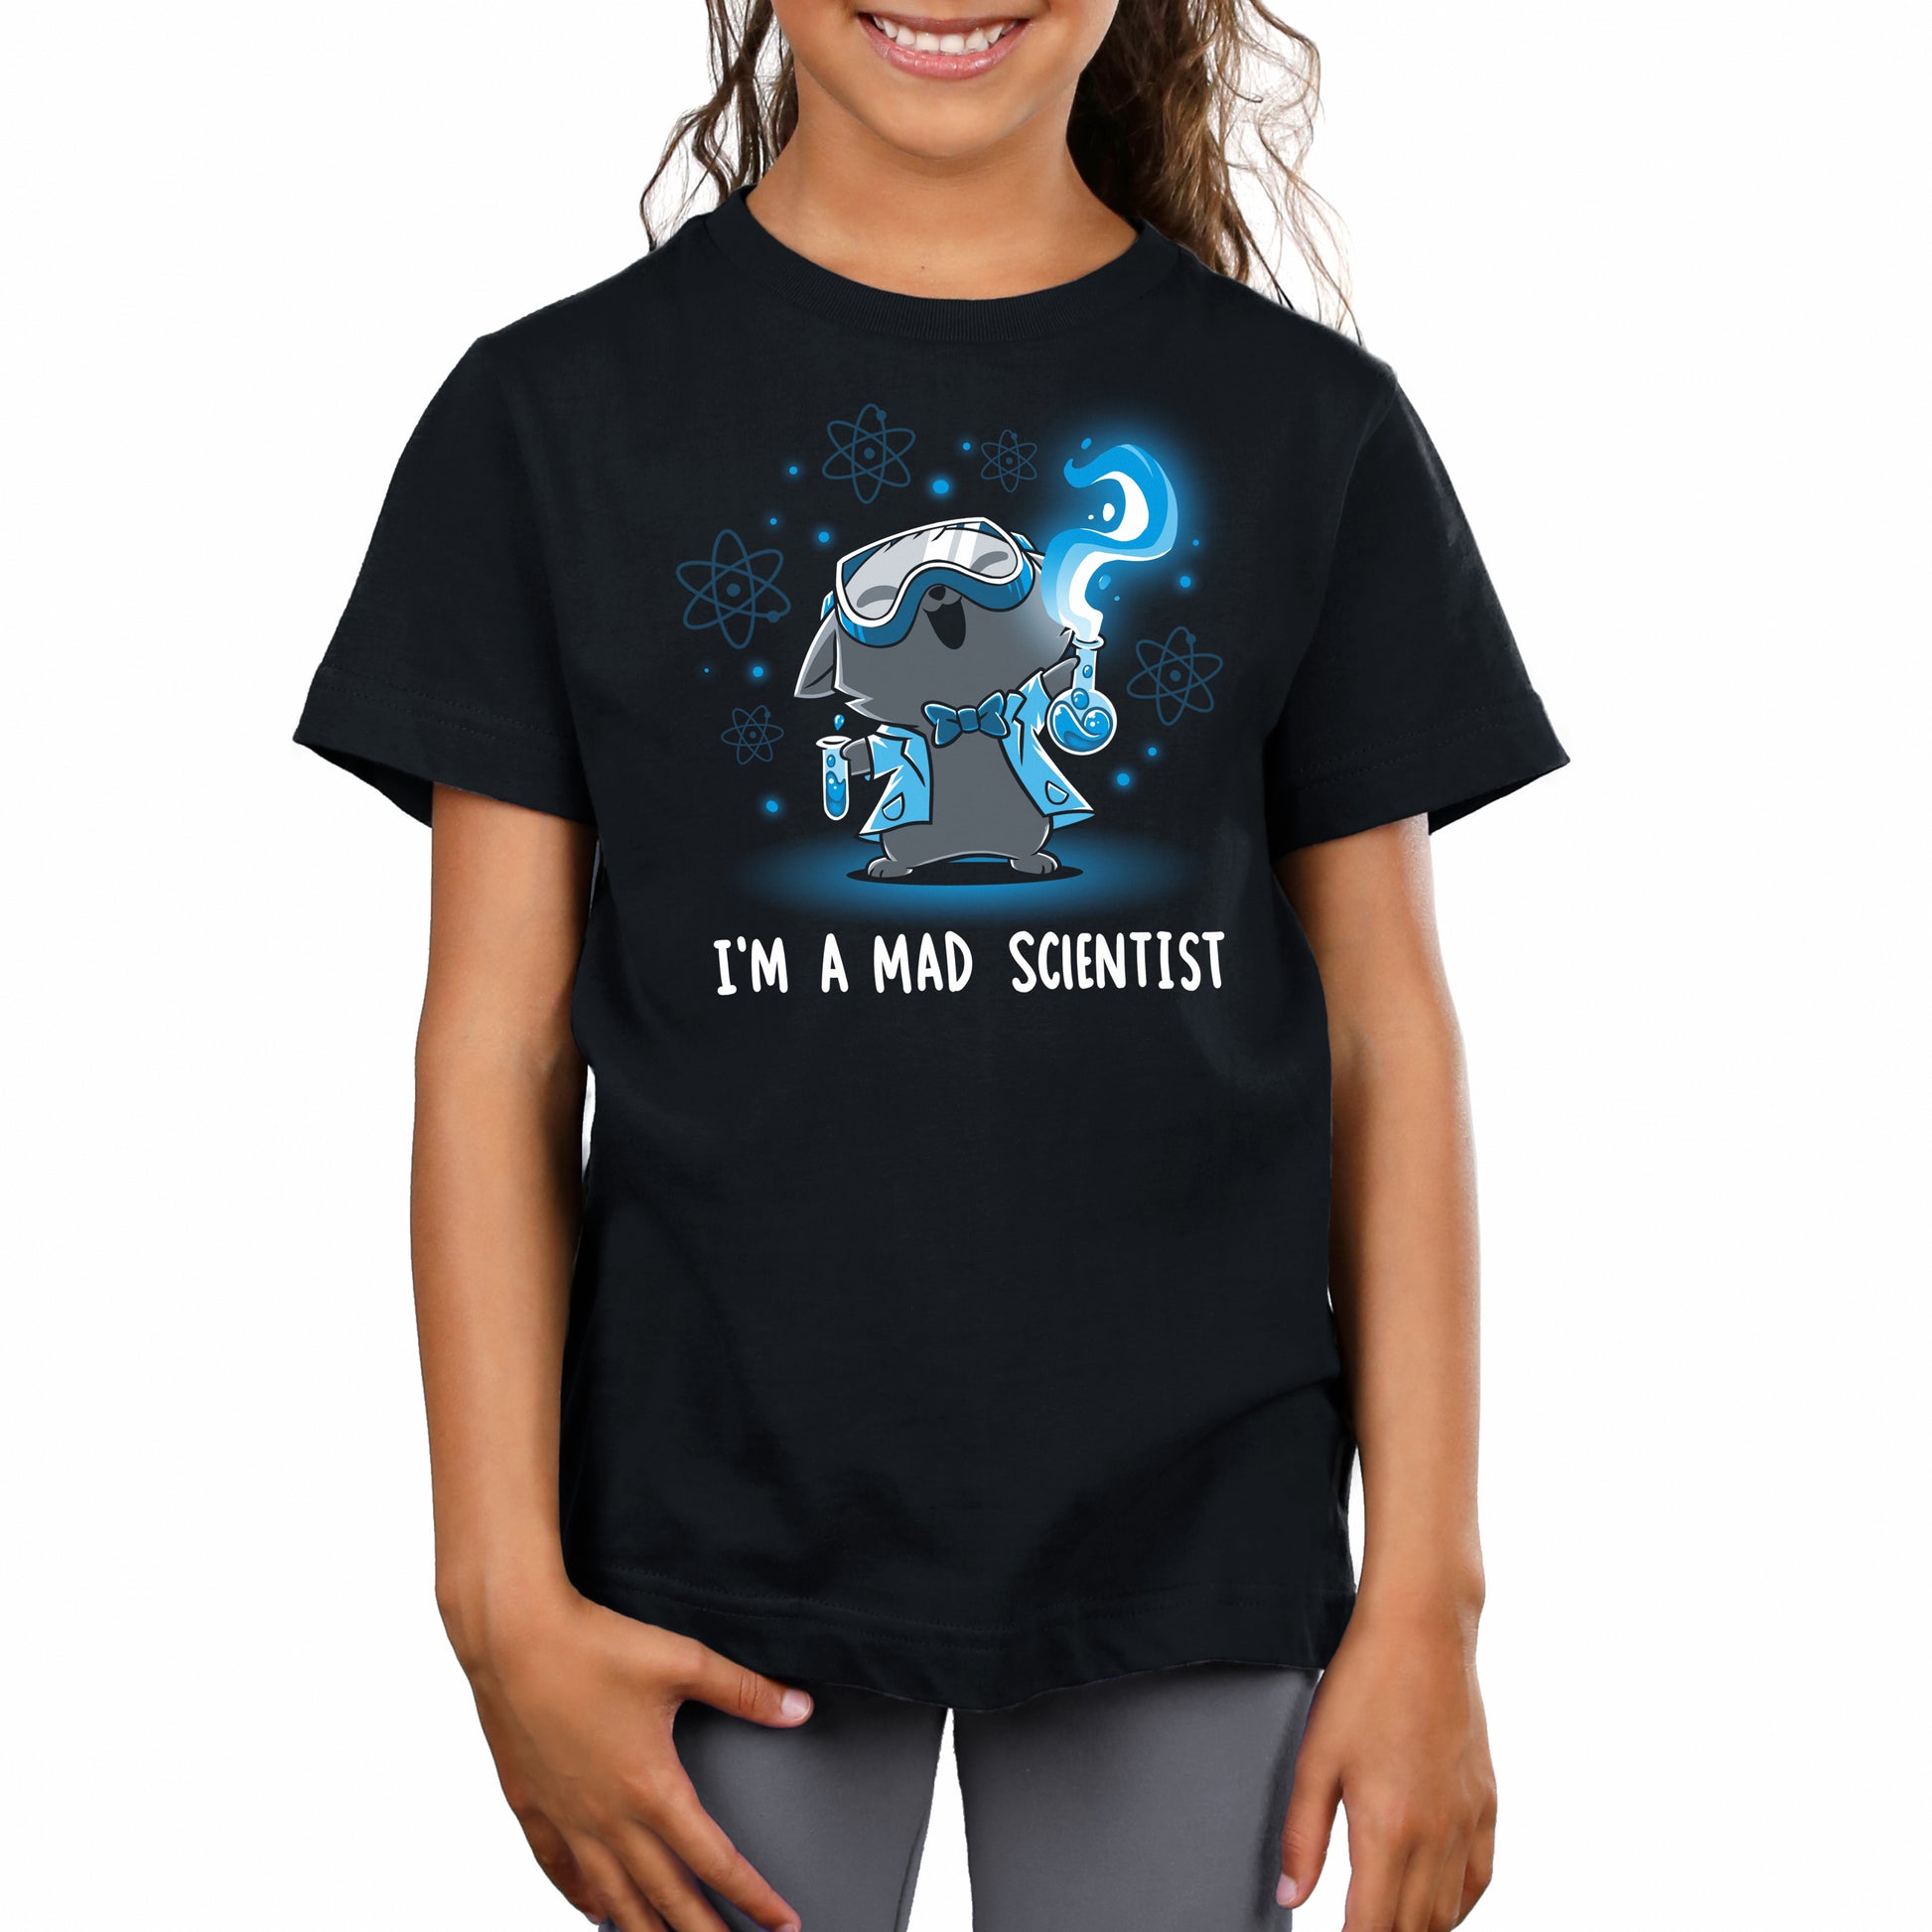 A TeeTurtle Mad Scientist black T-shirt featuring a girl posing as a Mad Scientist.